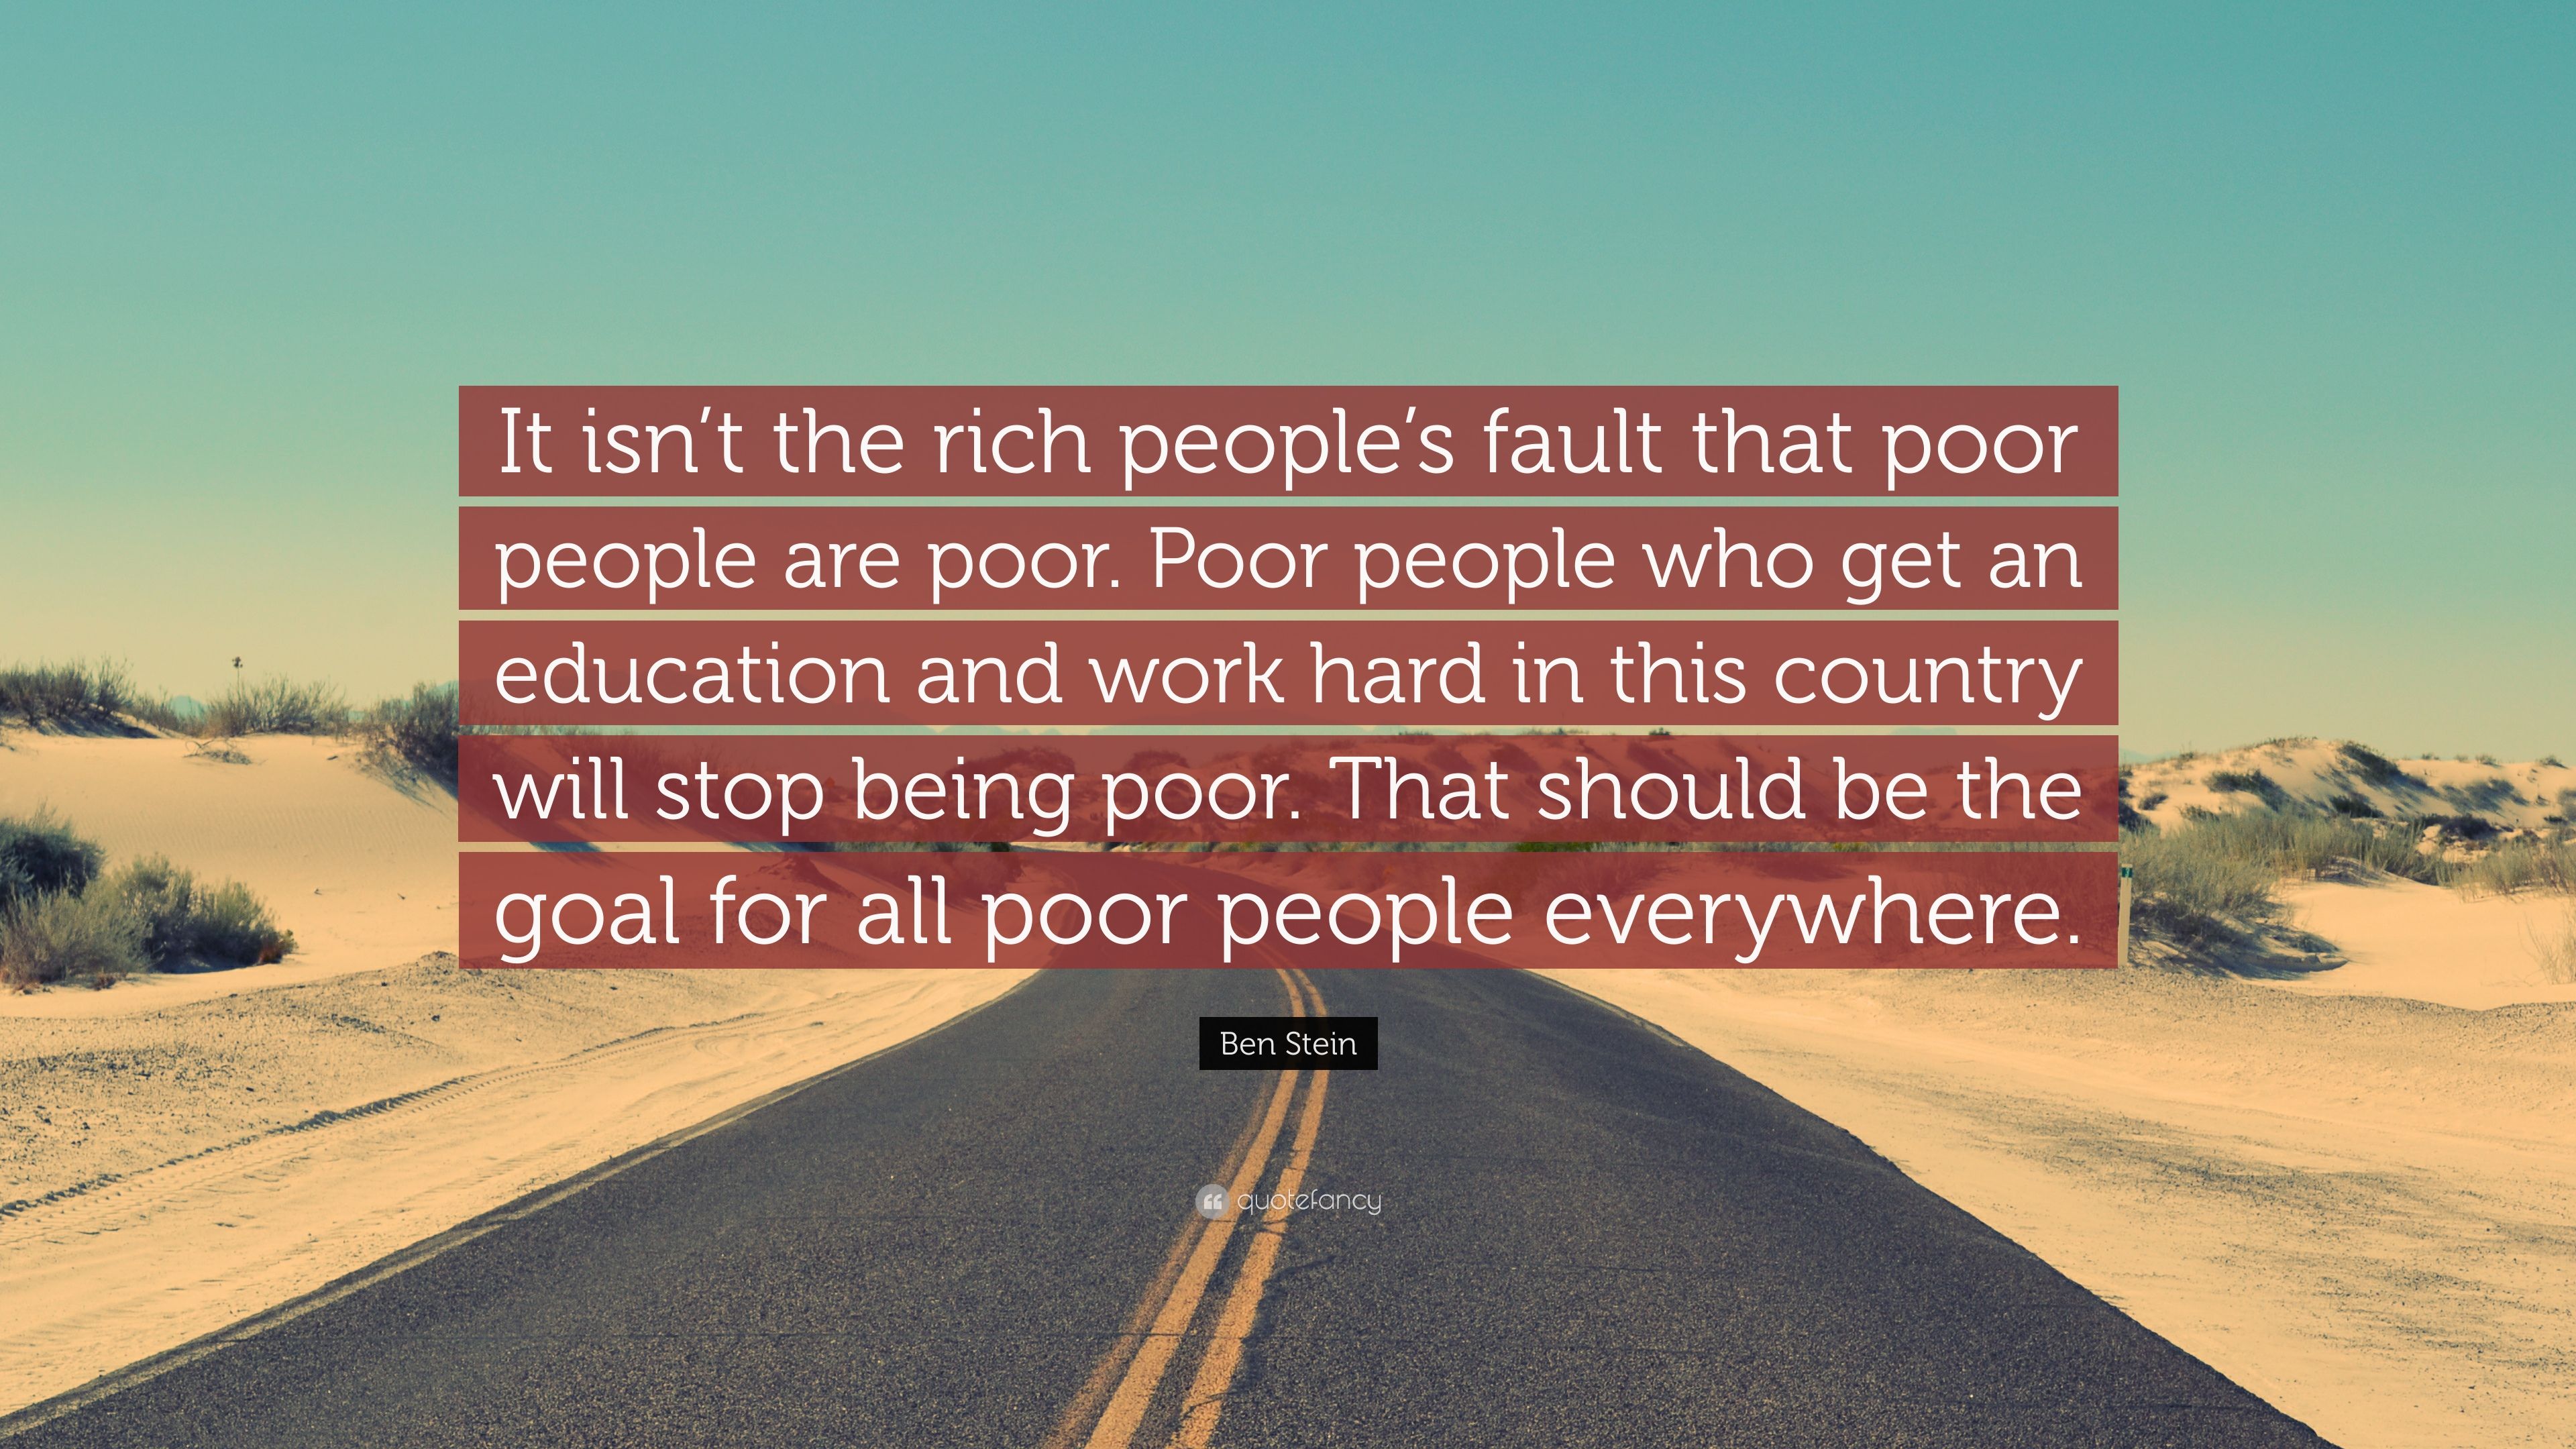 Ben Stein Quote: “It isn't the rich people's fault that poor